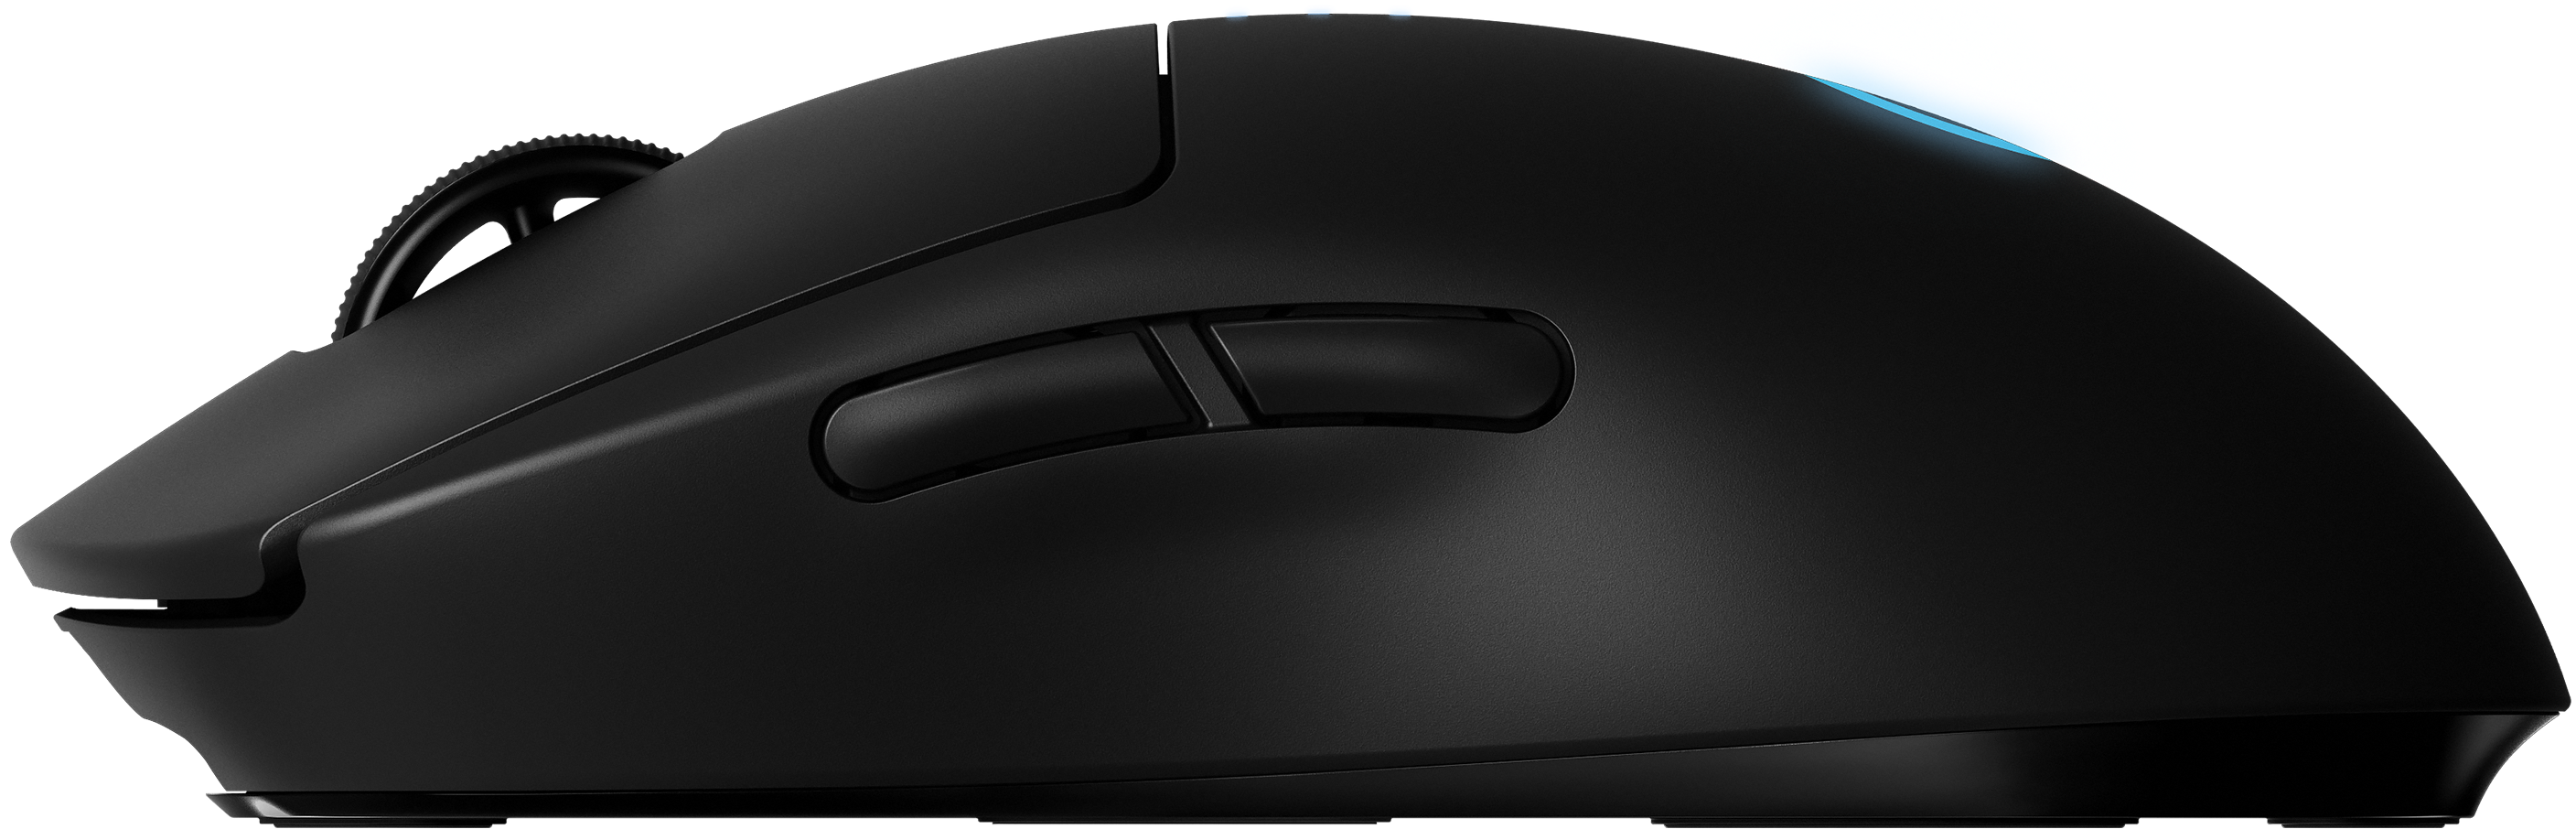 Logitech G Pro Wireless Gaming Mouse For Esports Pros